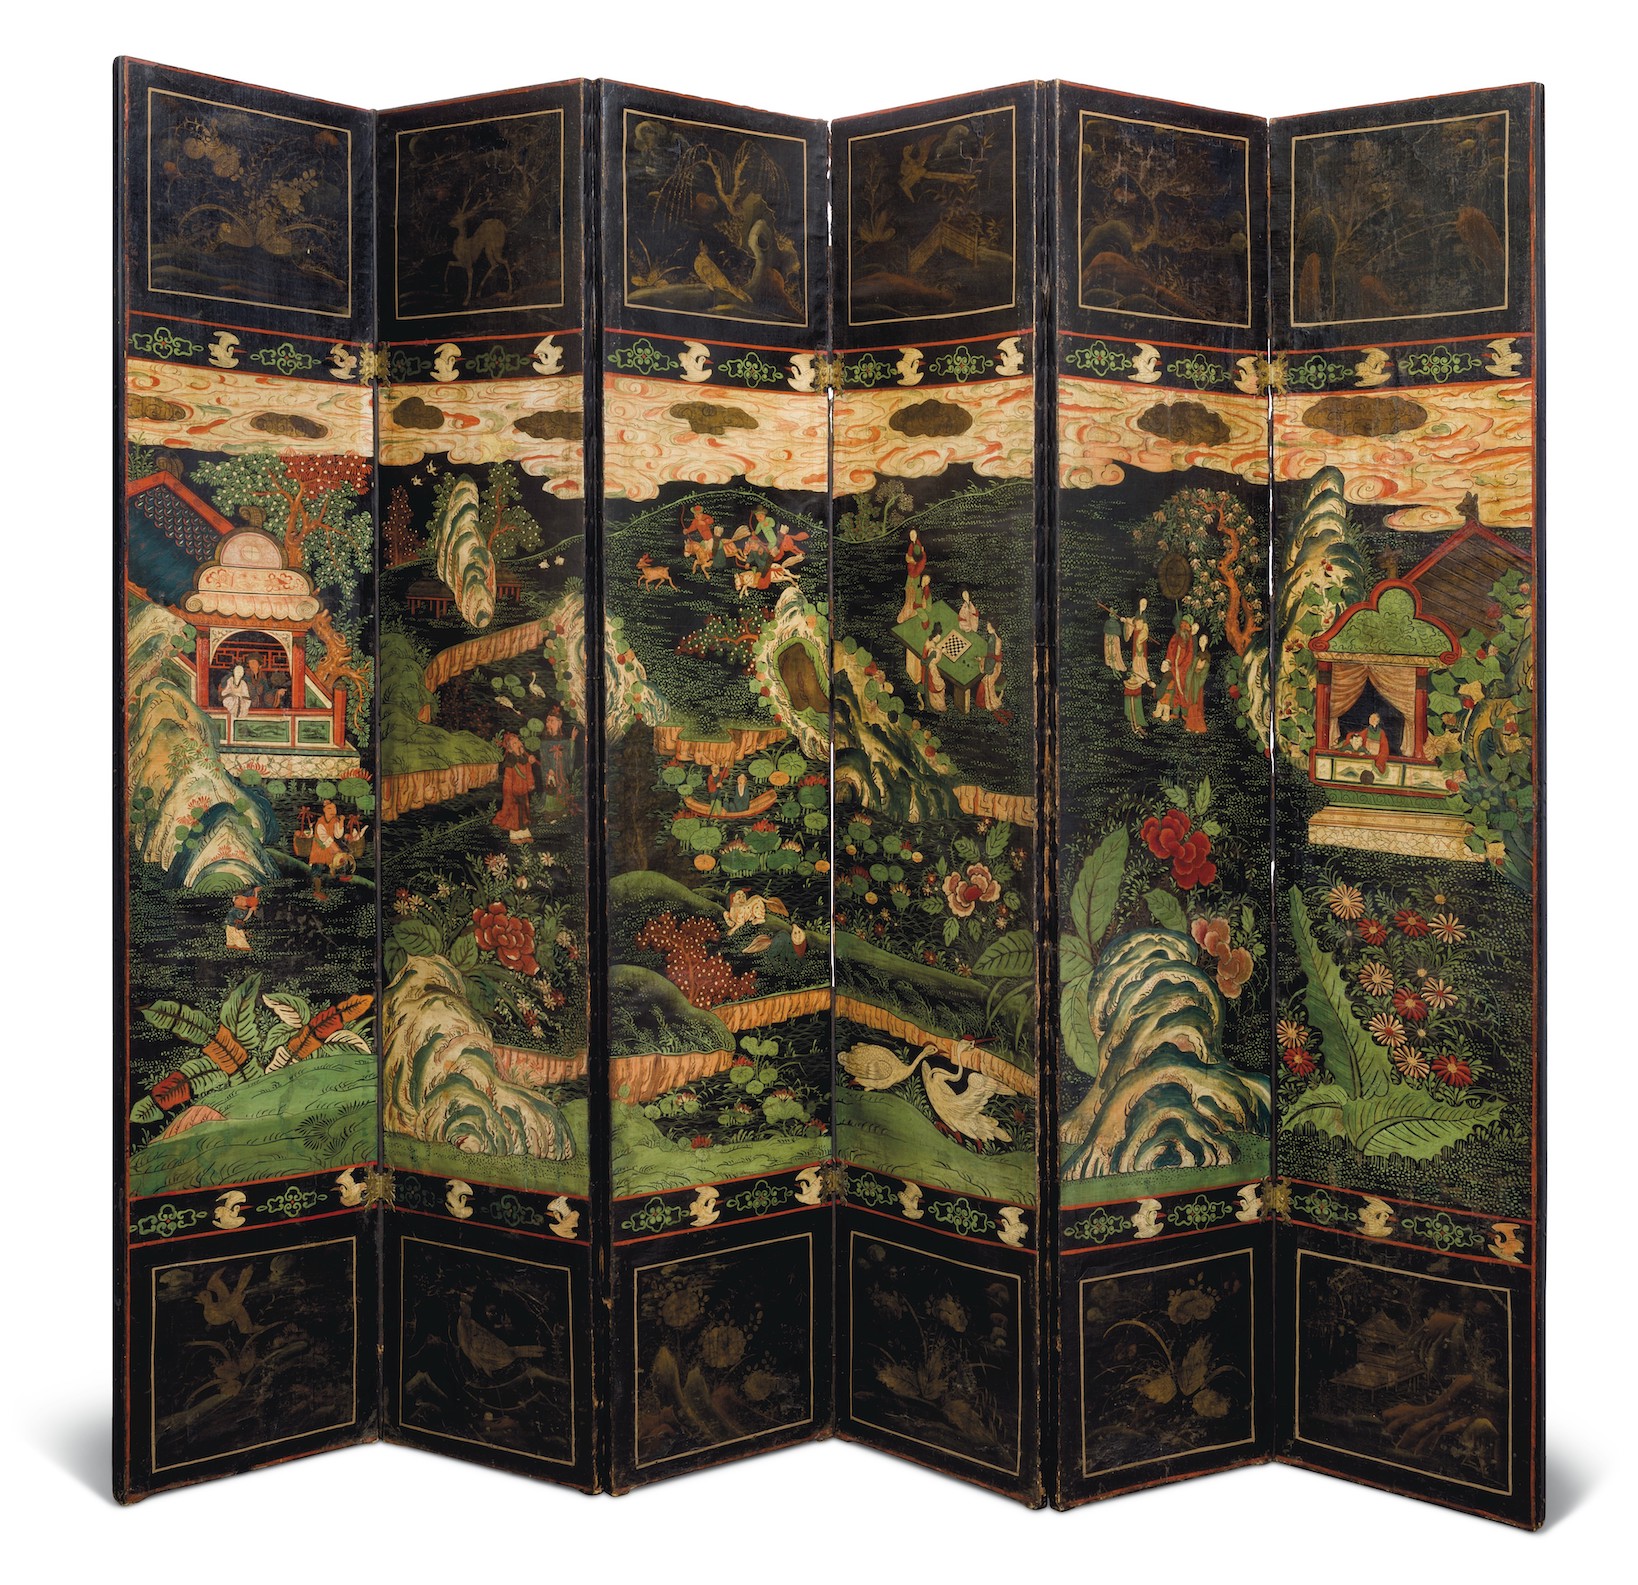 A NORTH EUROPEAN PAINTED CANVAS SIX FOLD CHINOISERIE SCREEN